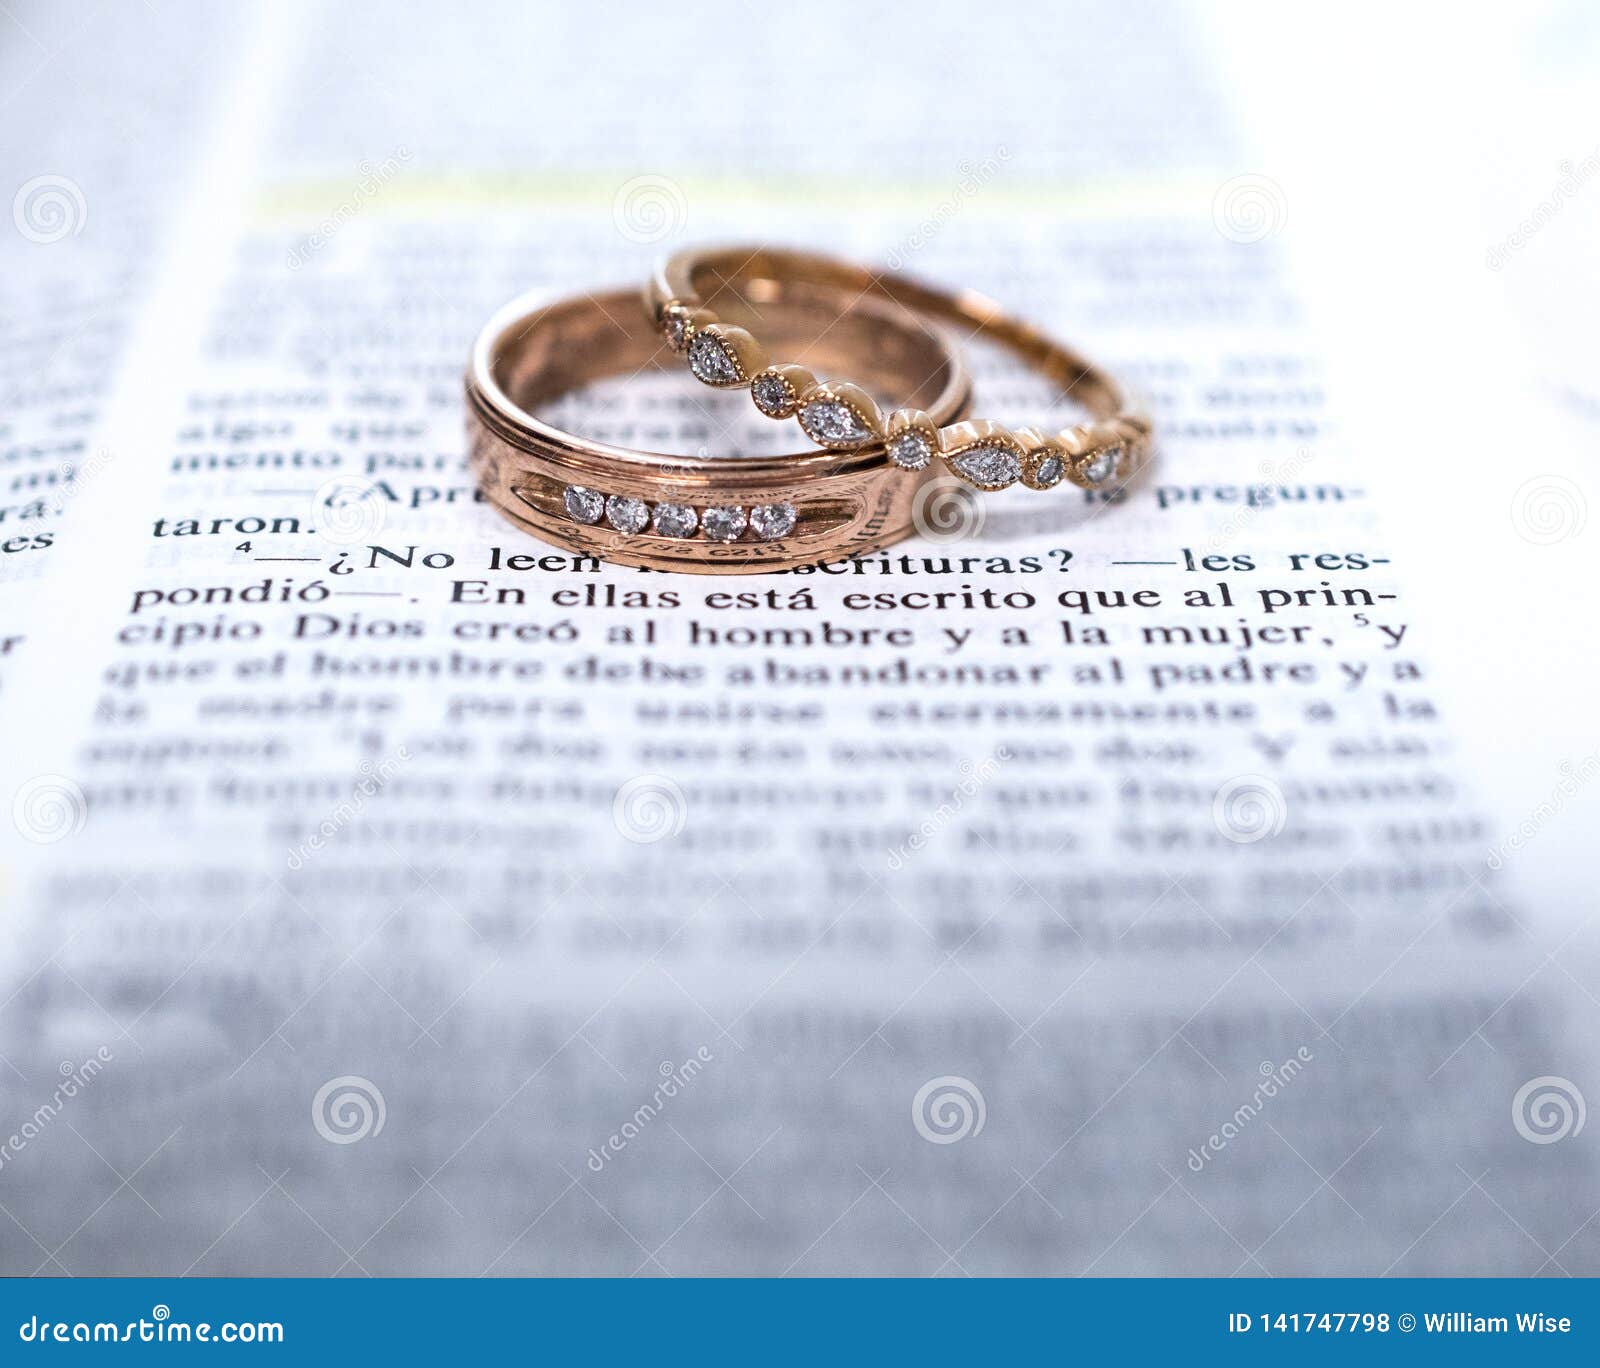 wedding rings and spanish bible scripture